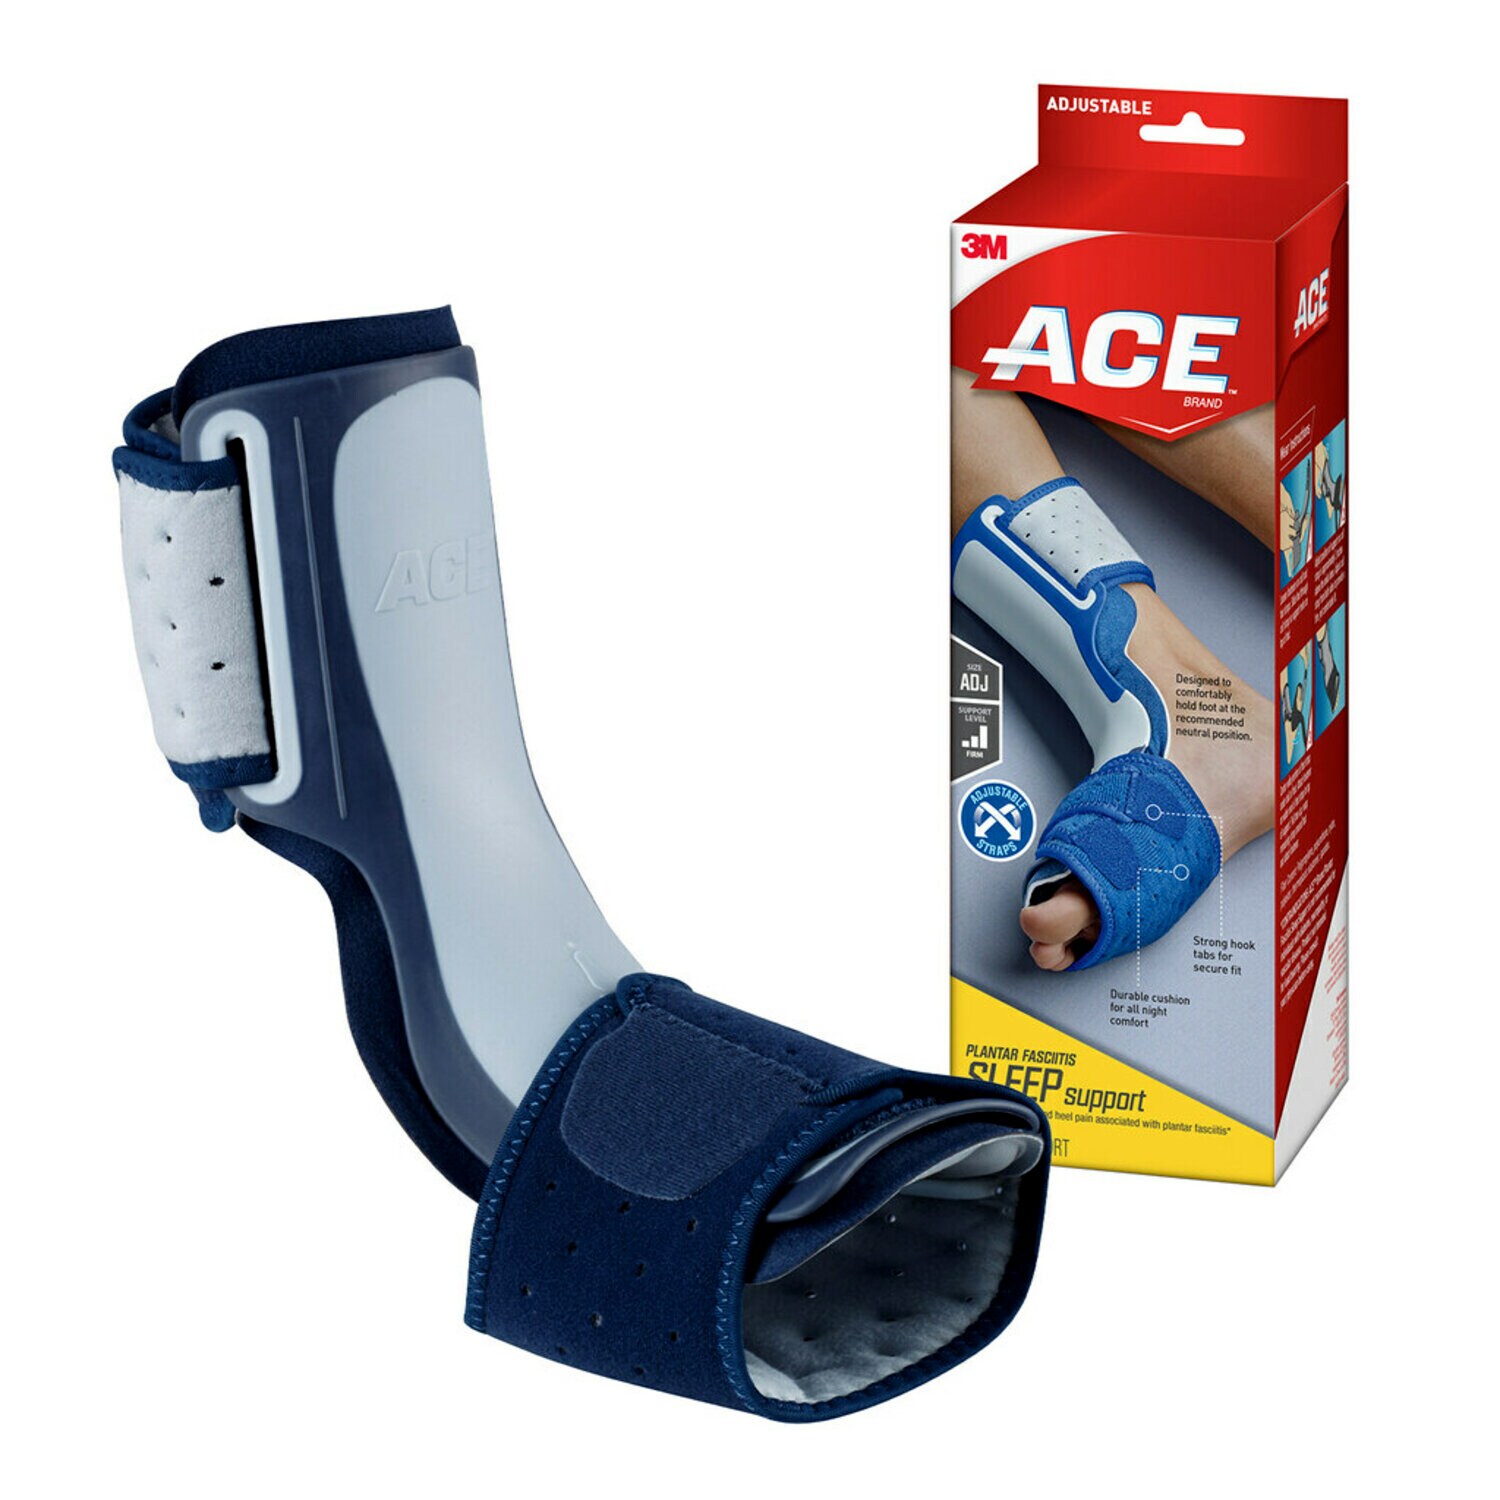 7100240819 - ACE Foot Support 209616-SIOC, Adjustable